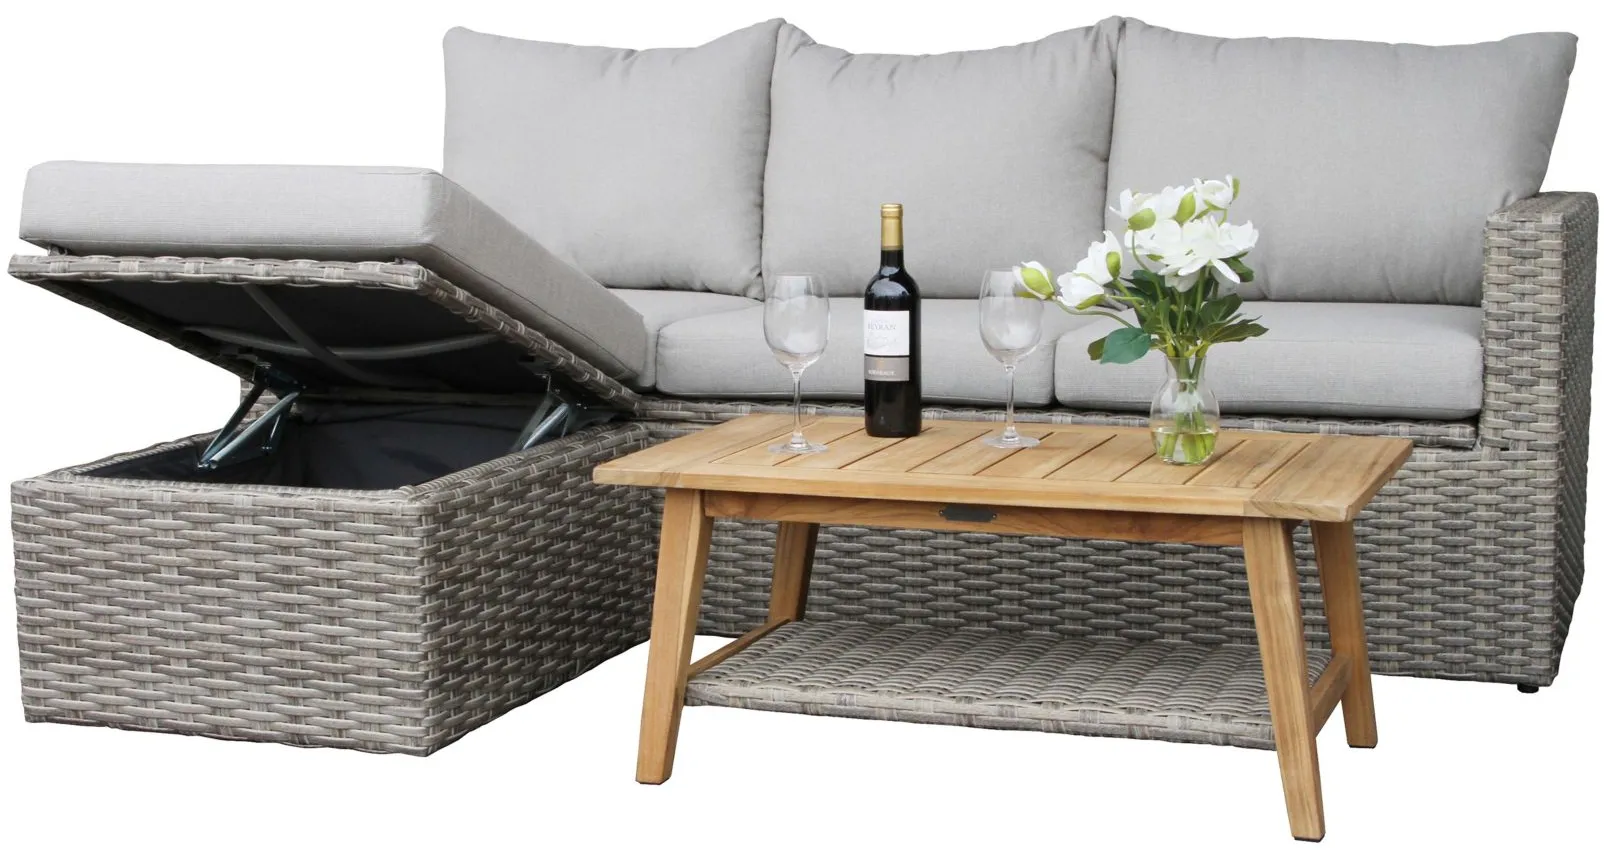 3 pc. Teak and Wicker Storage Sectional Group with Coffee Table in Grey by Outdoor Interiors